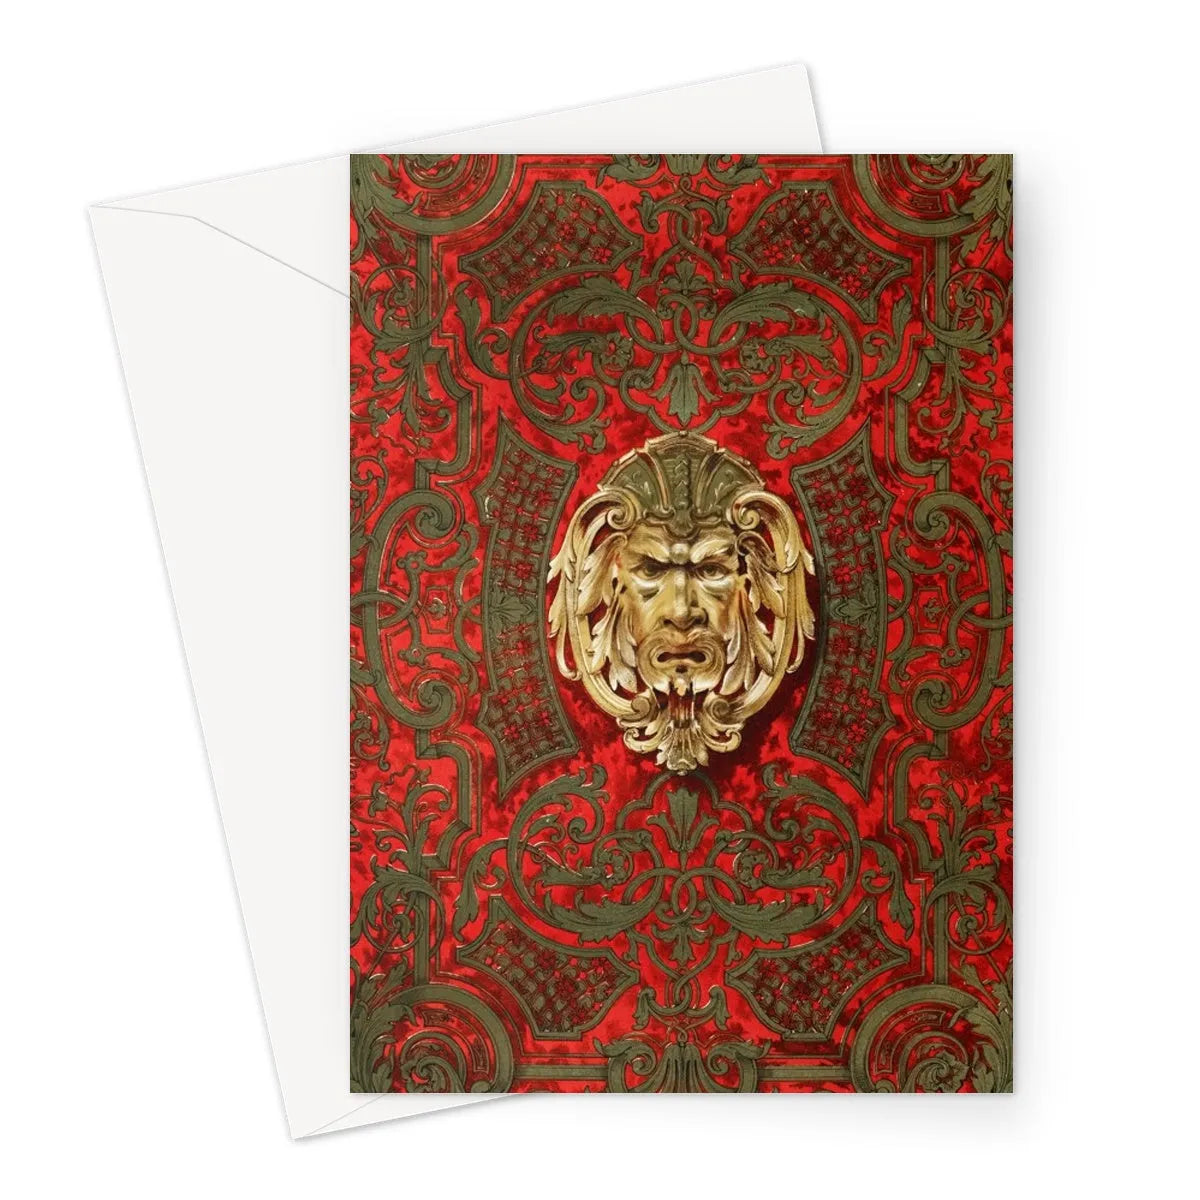 Panel In Buhl By Sir Matthew Digby Wyatt Greeting Card - A5 Portrait / 1 Card - Notebooks & Notepads - Aesthetic Art